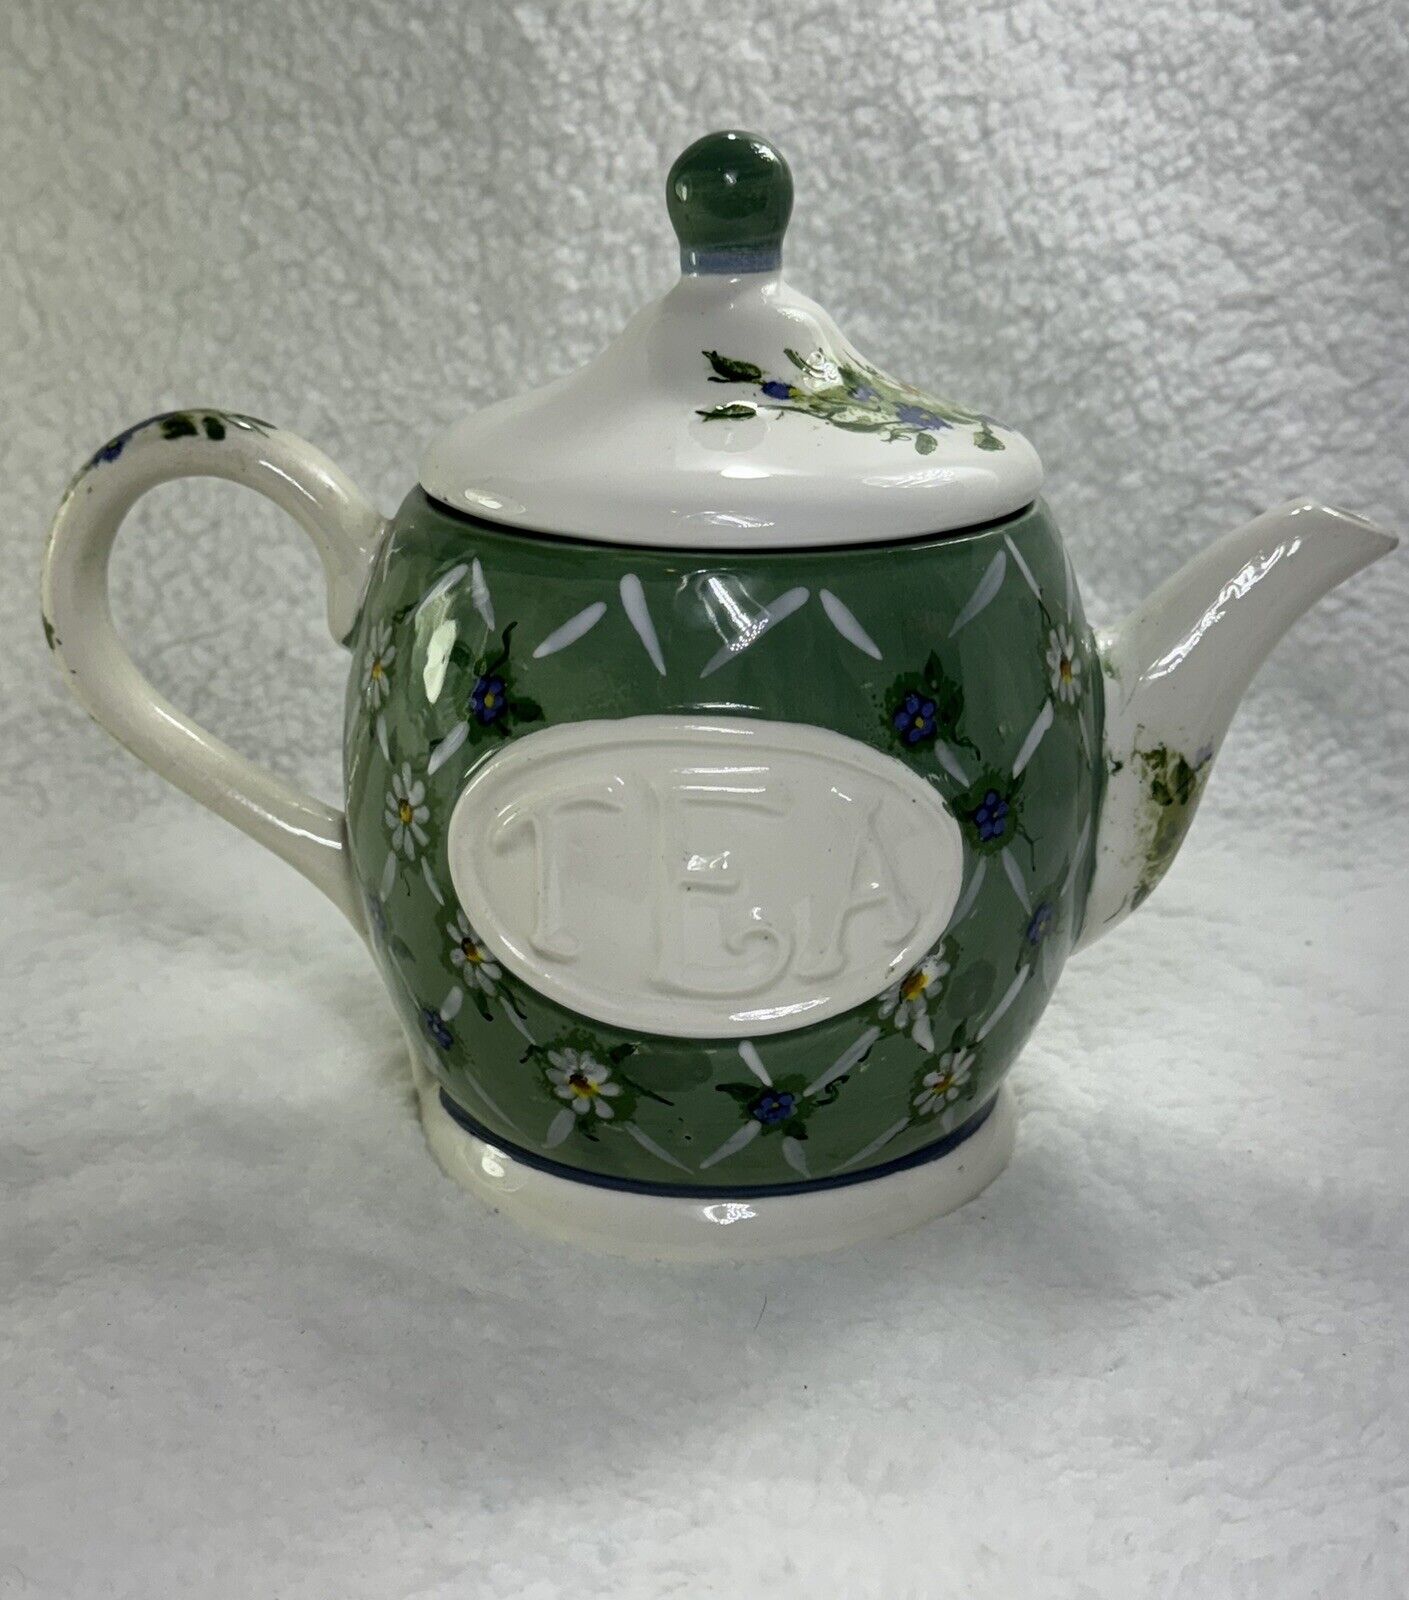 Vintage The Kathy Hatch Collection Handpainted Tea Pot From The Herb Collection